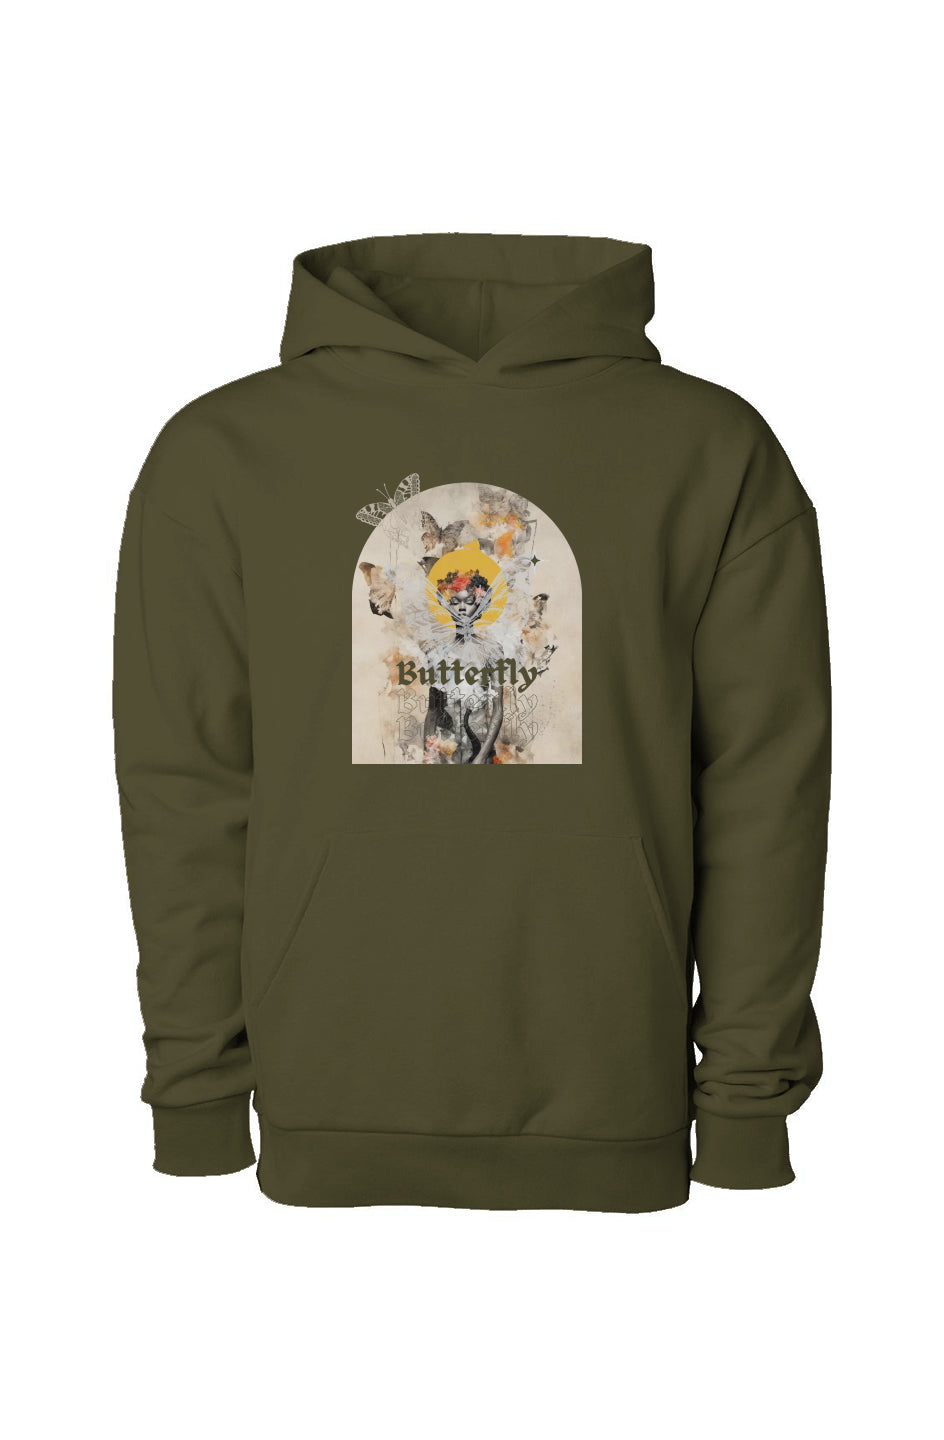 &amp;#39;butterfly&amp;#39; pullover hooded sweatshirt